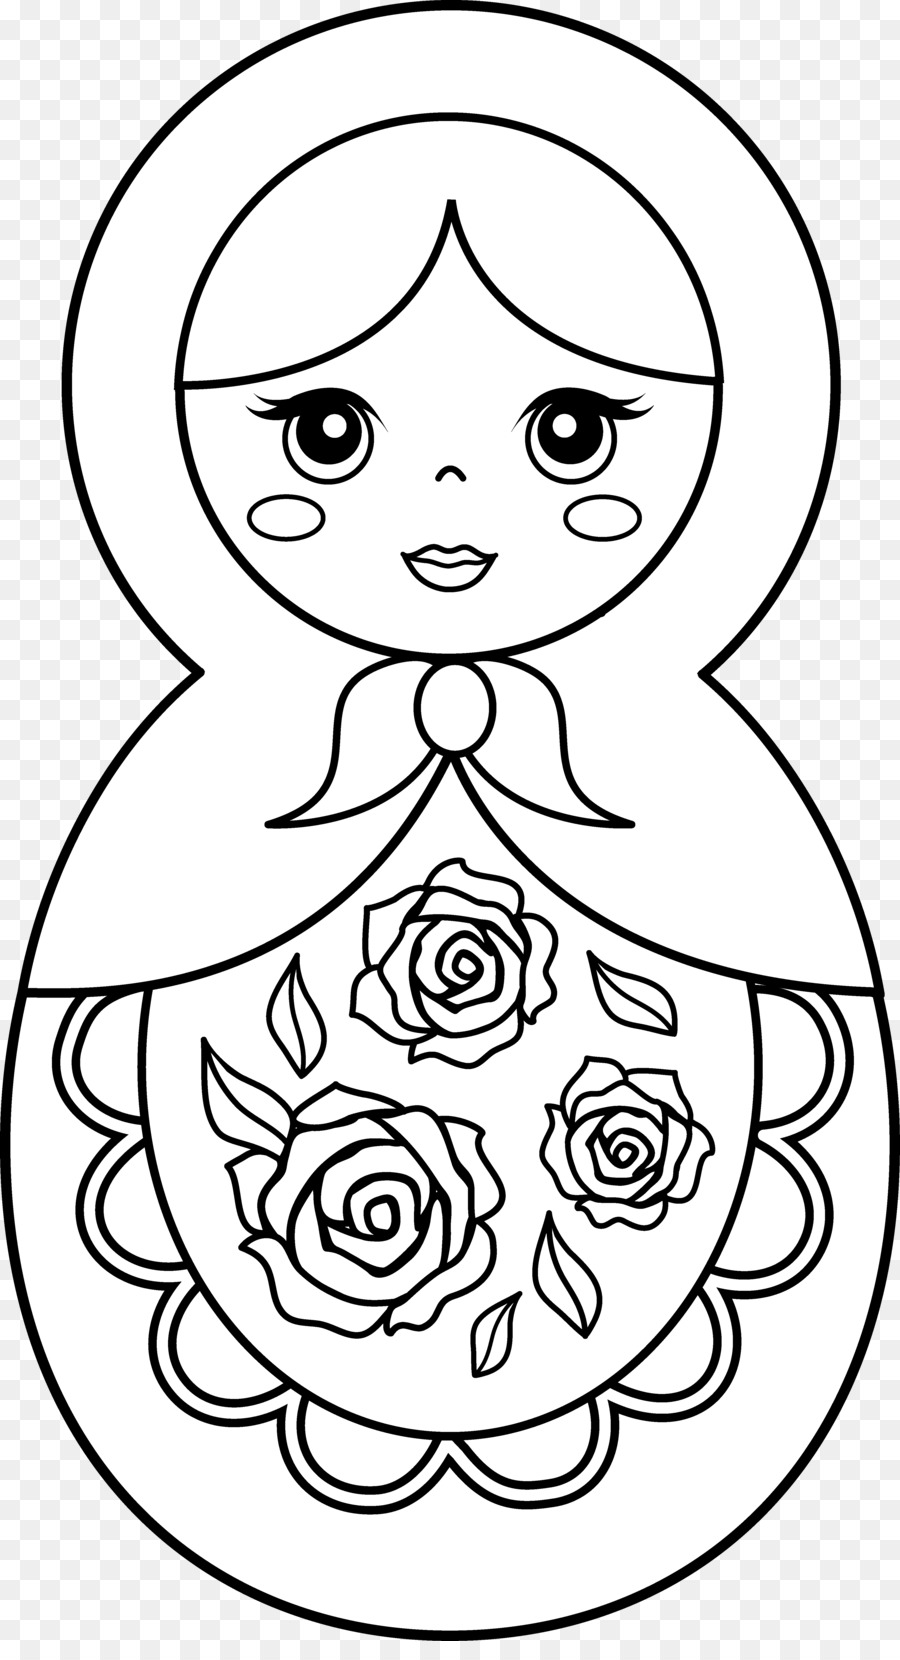 Matryoshka doll Coloring book Paper doll Toy - Russian Doll Cliparts png download - 3985*7268 - Free Transparent  png Download.